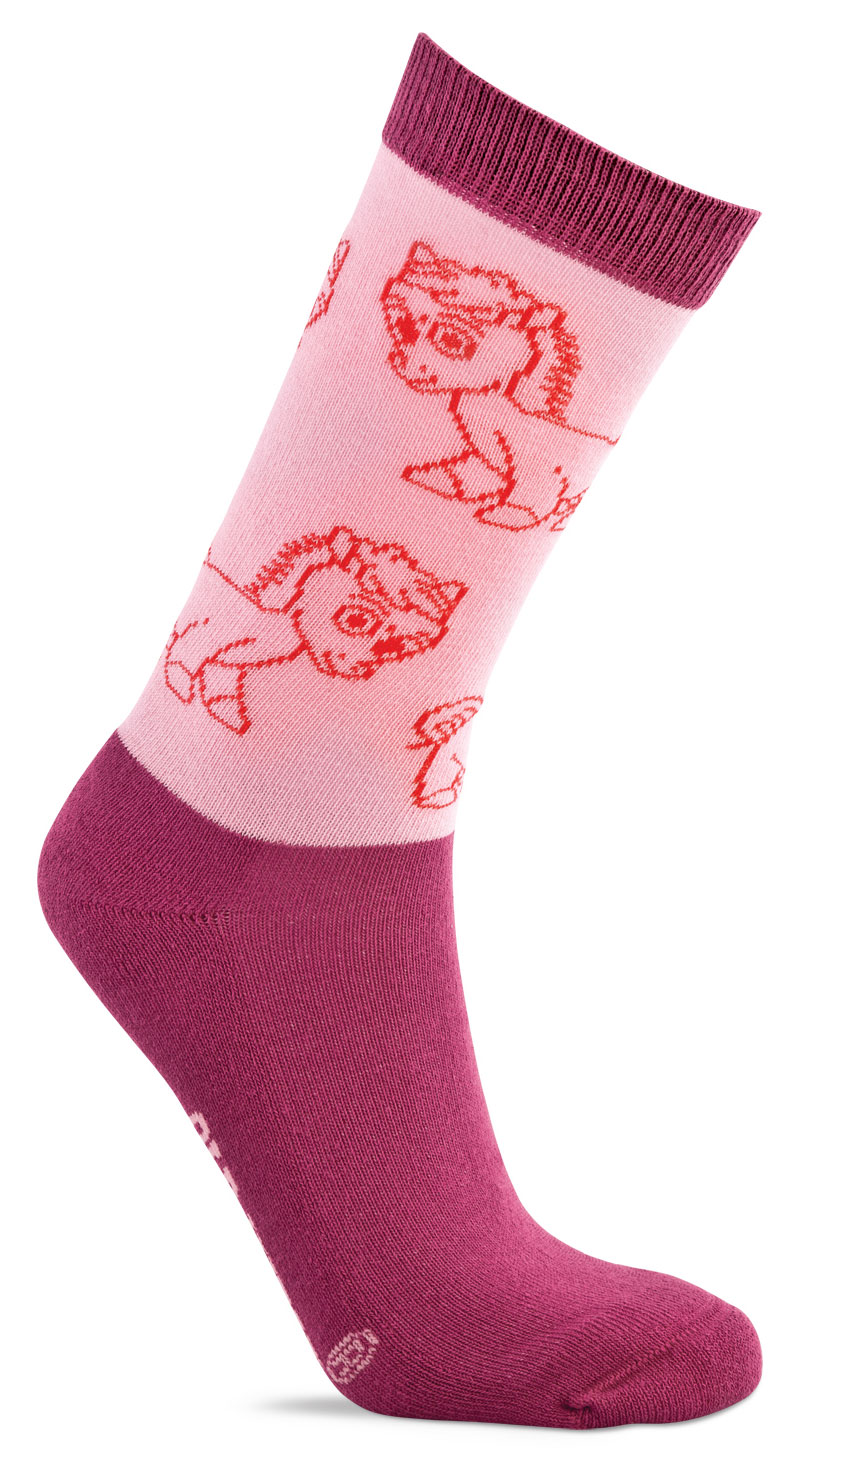 Riding knee socks for children with horse motif, pink